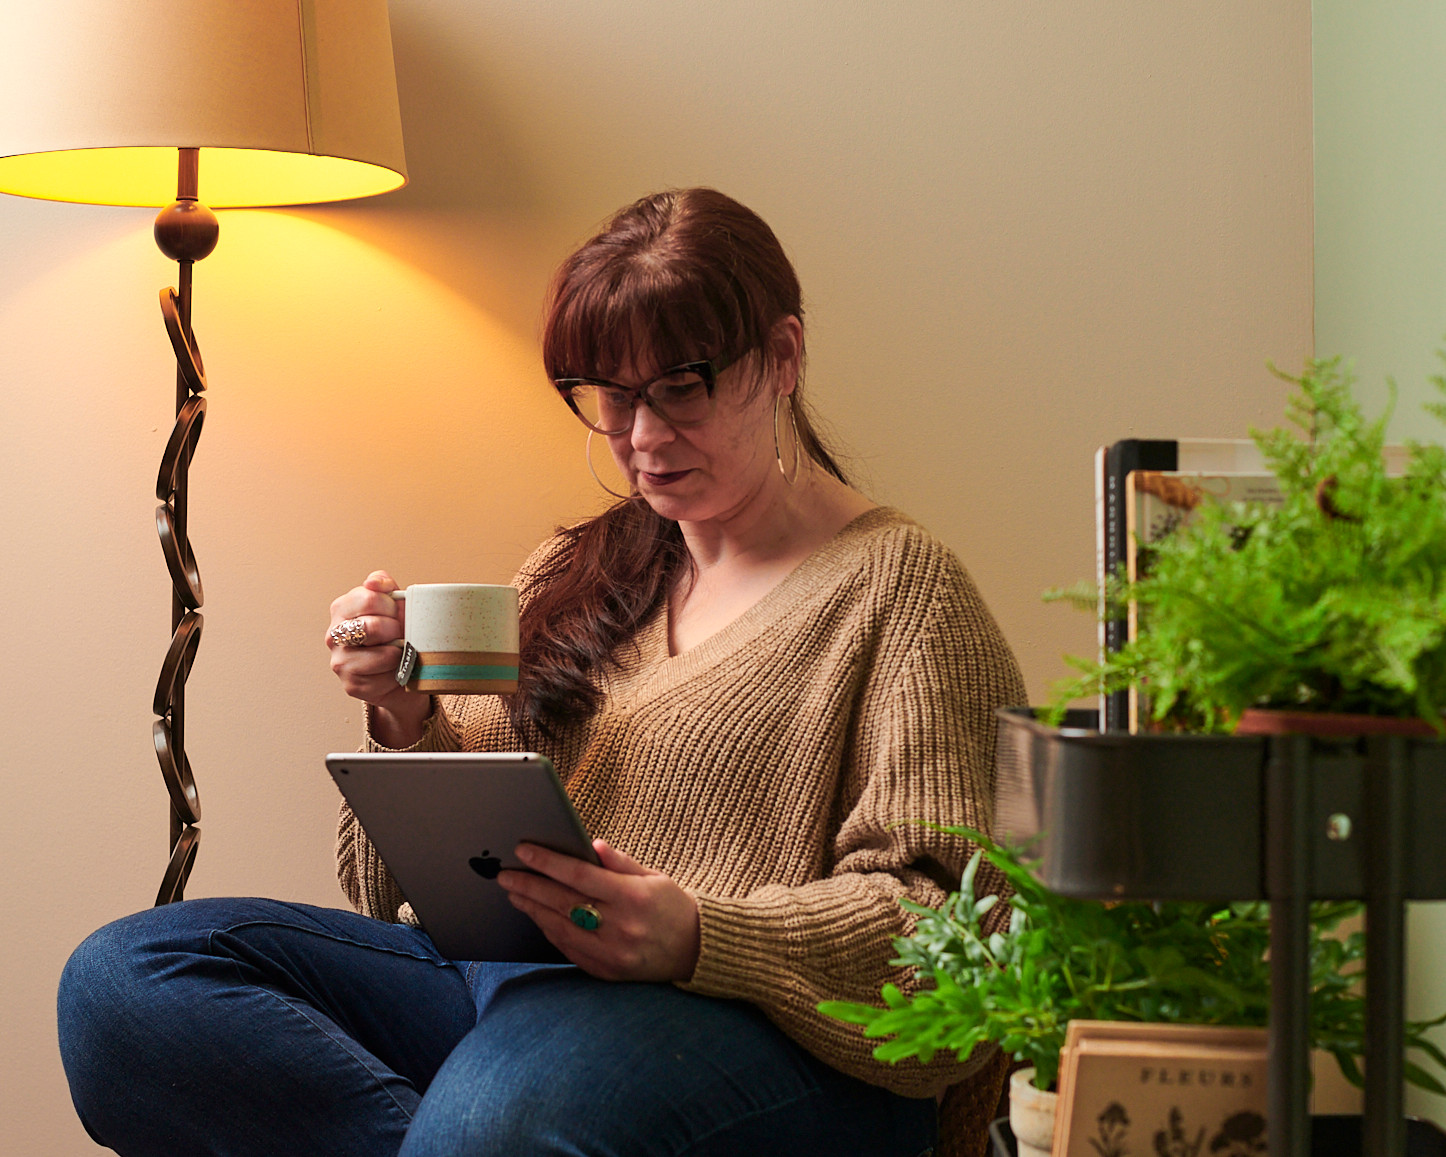 Woman with glasses reading at home on a tablet while drinking tea